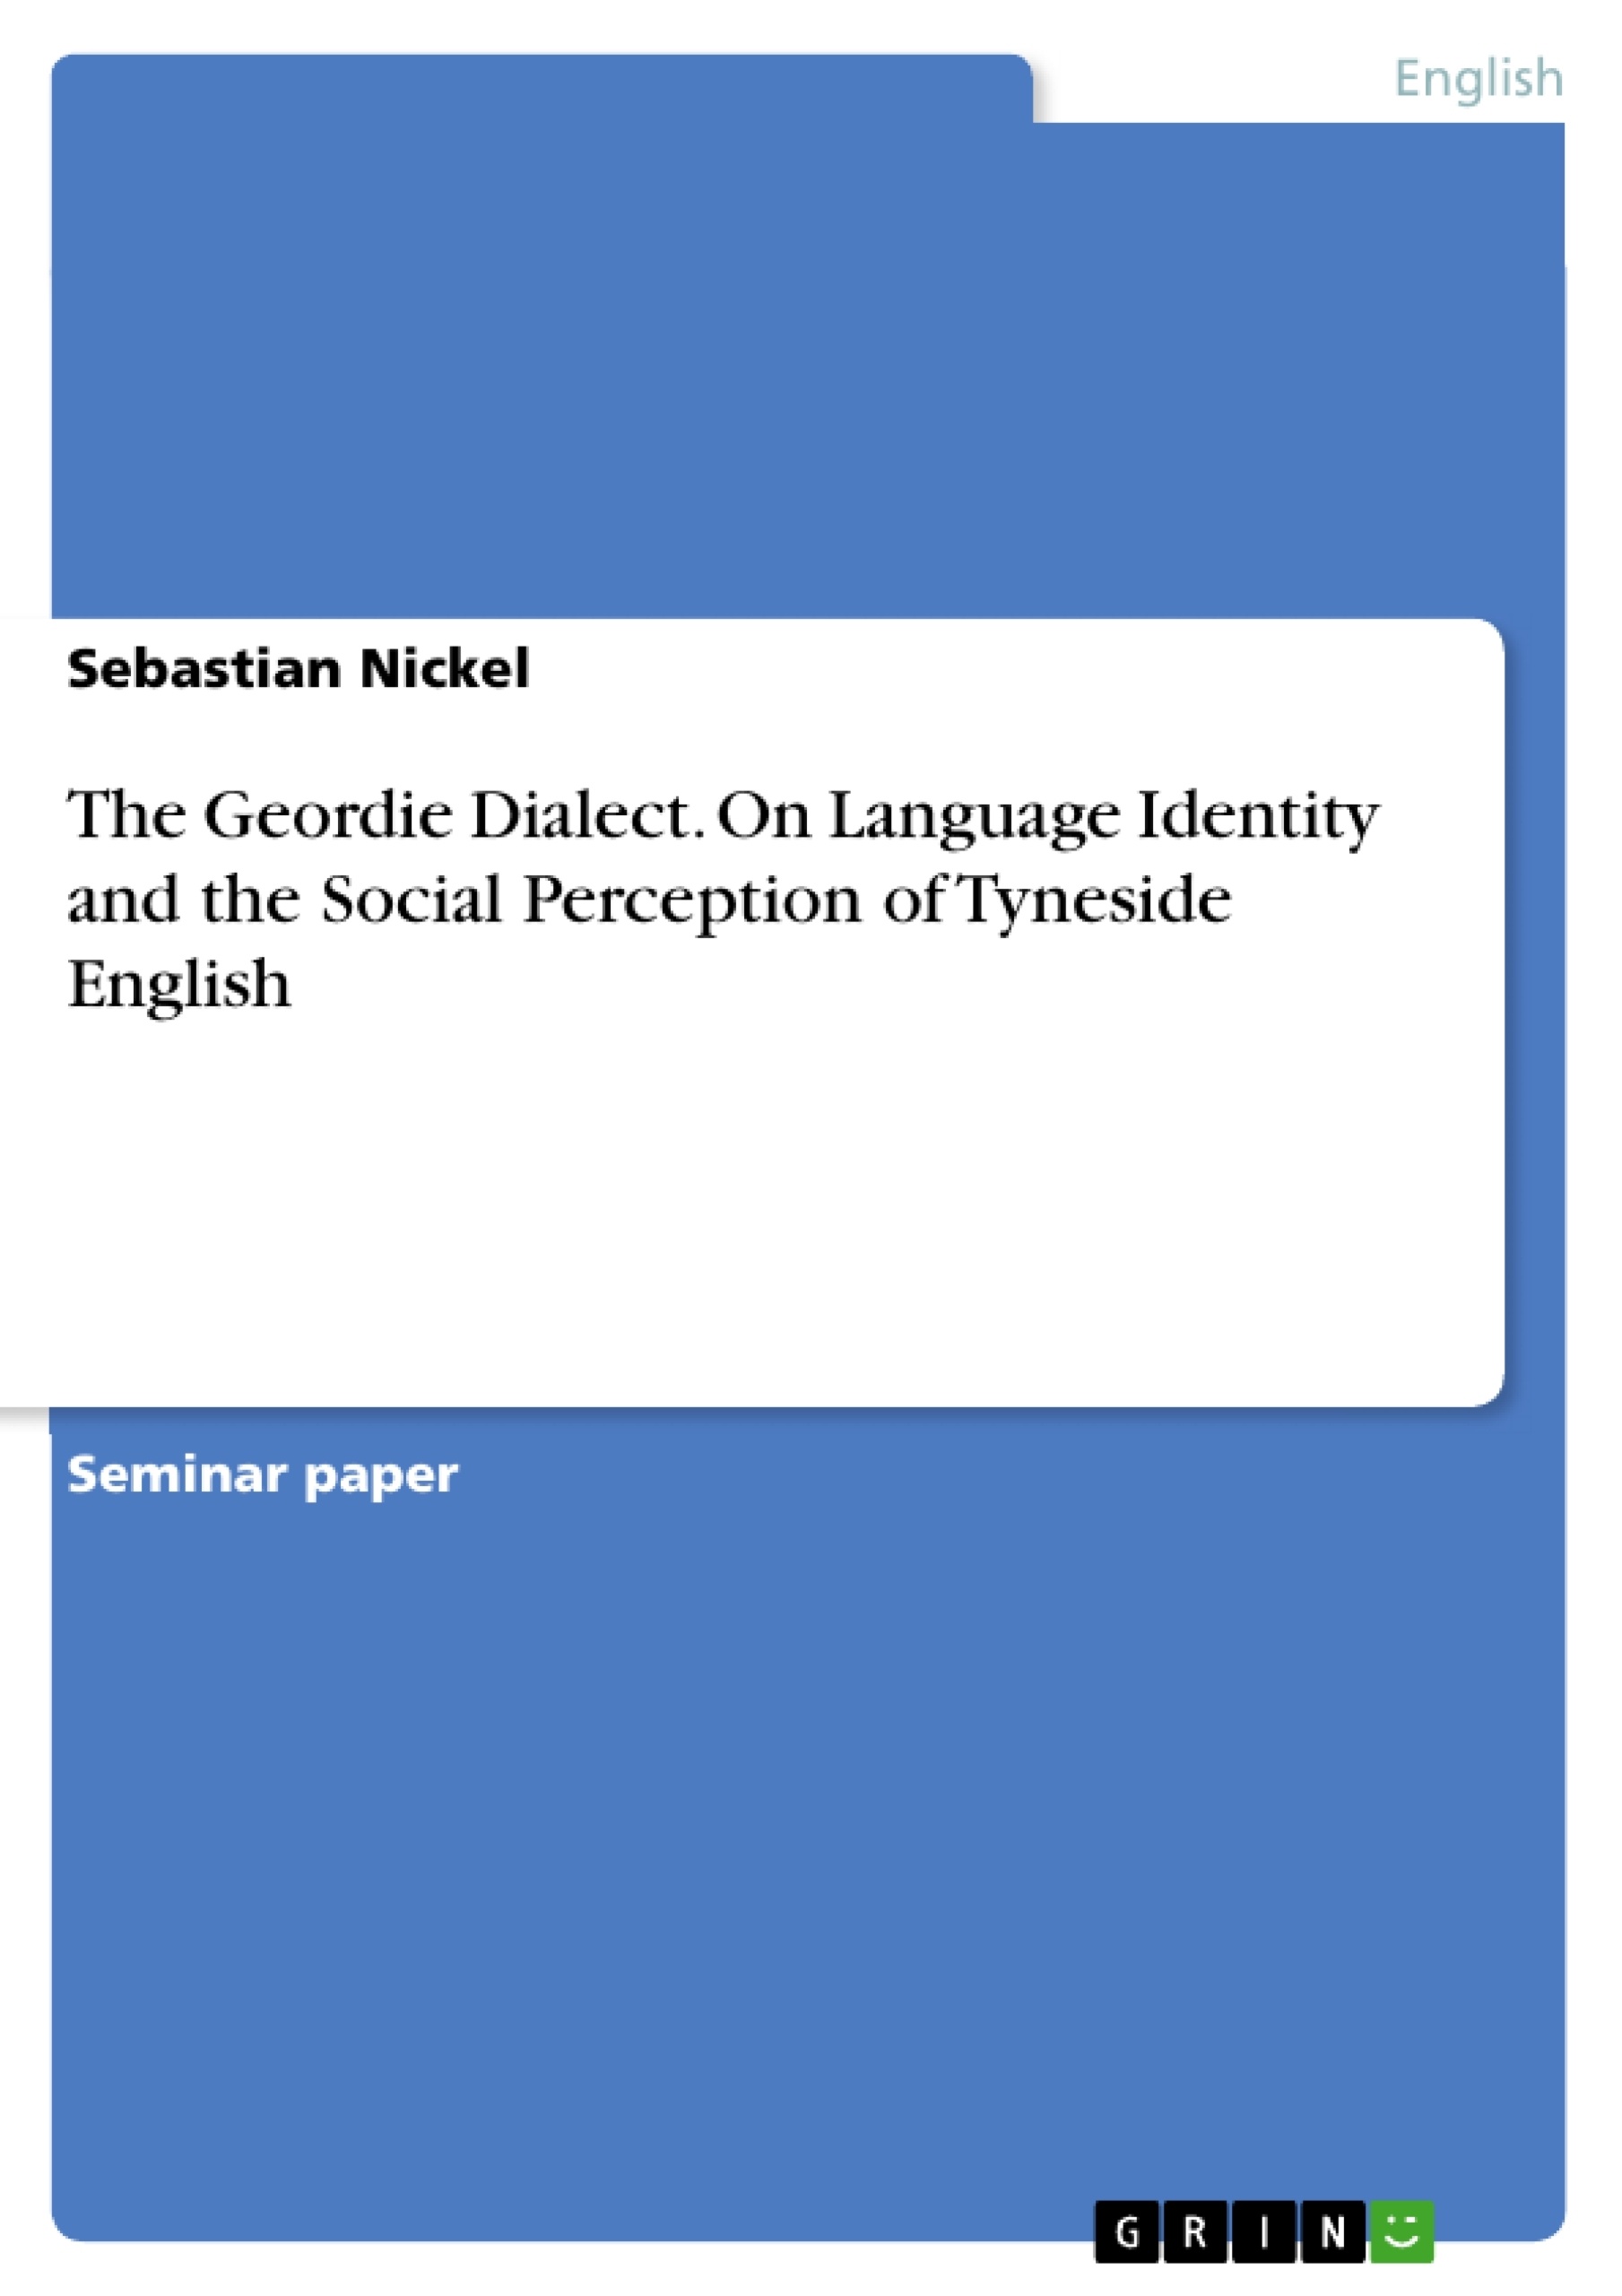 Titel: The Geordie Dialect. On Language Identity and the Social Perception of Tyneside English